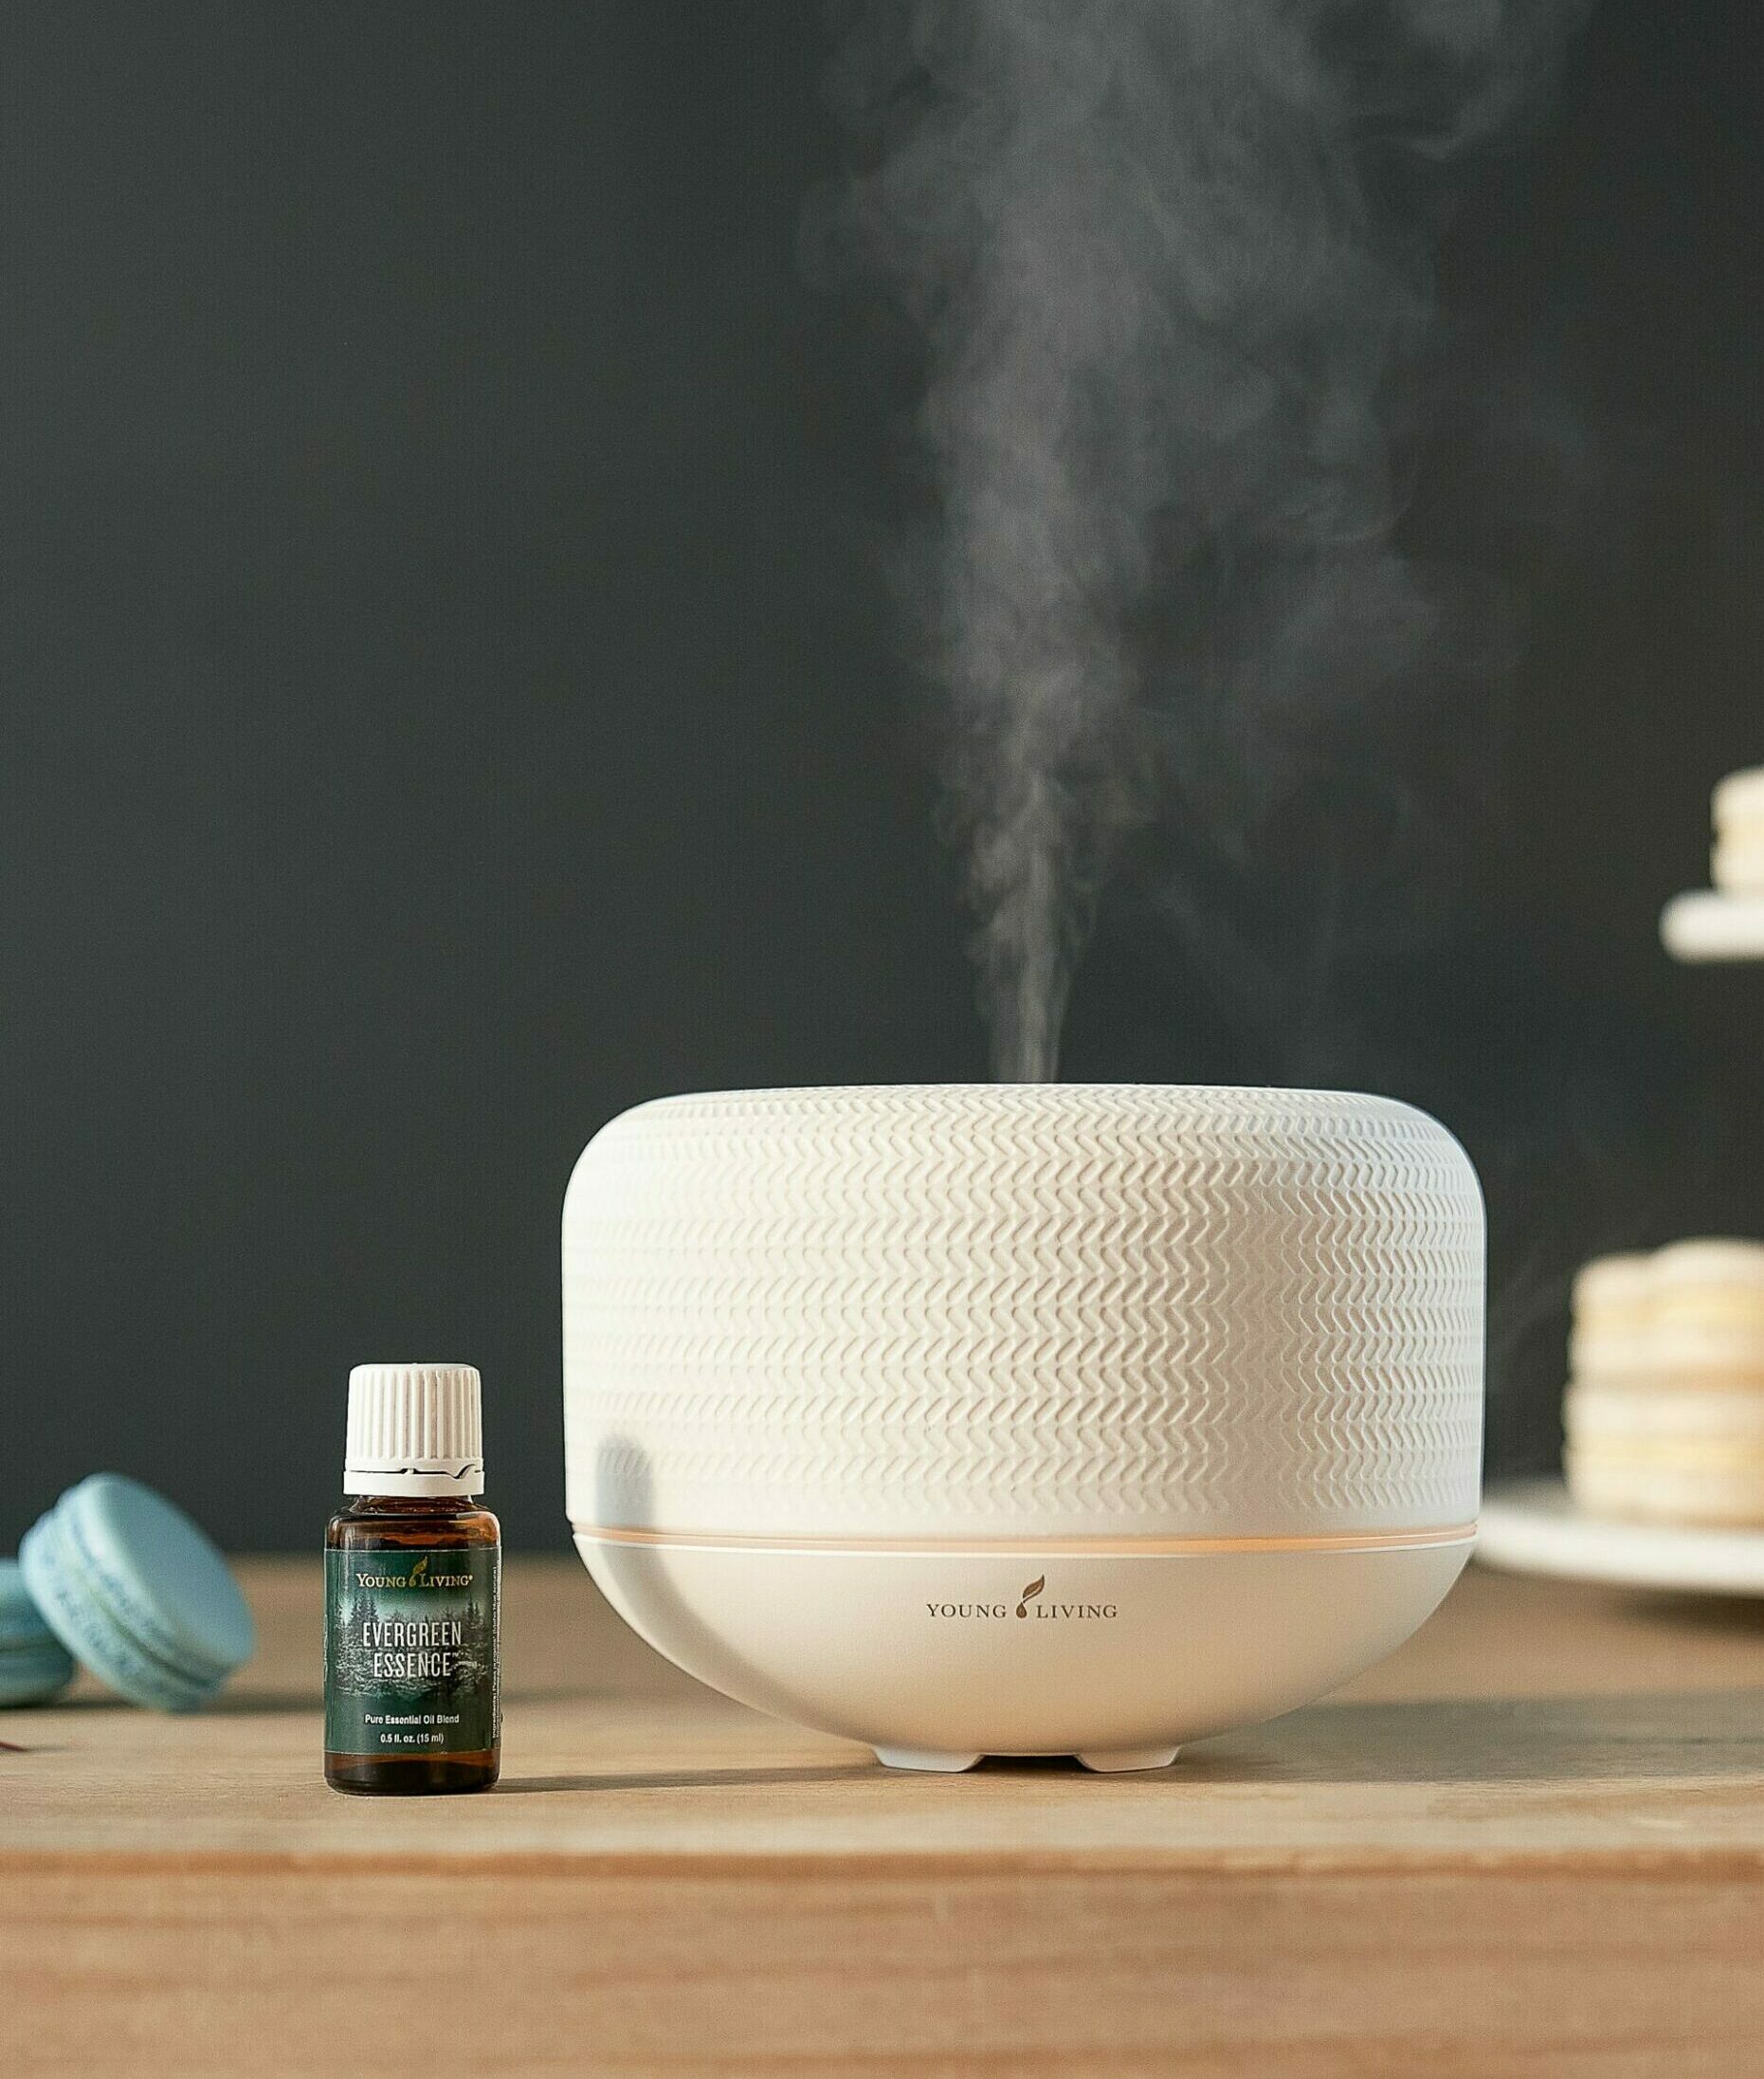 Evergreen Essence sitting next to Macaron diffuser - Young Living Lavender Life blog